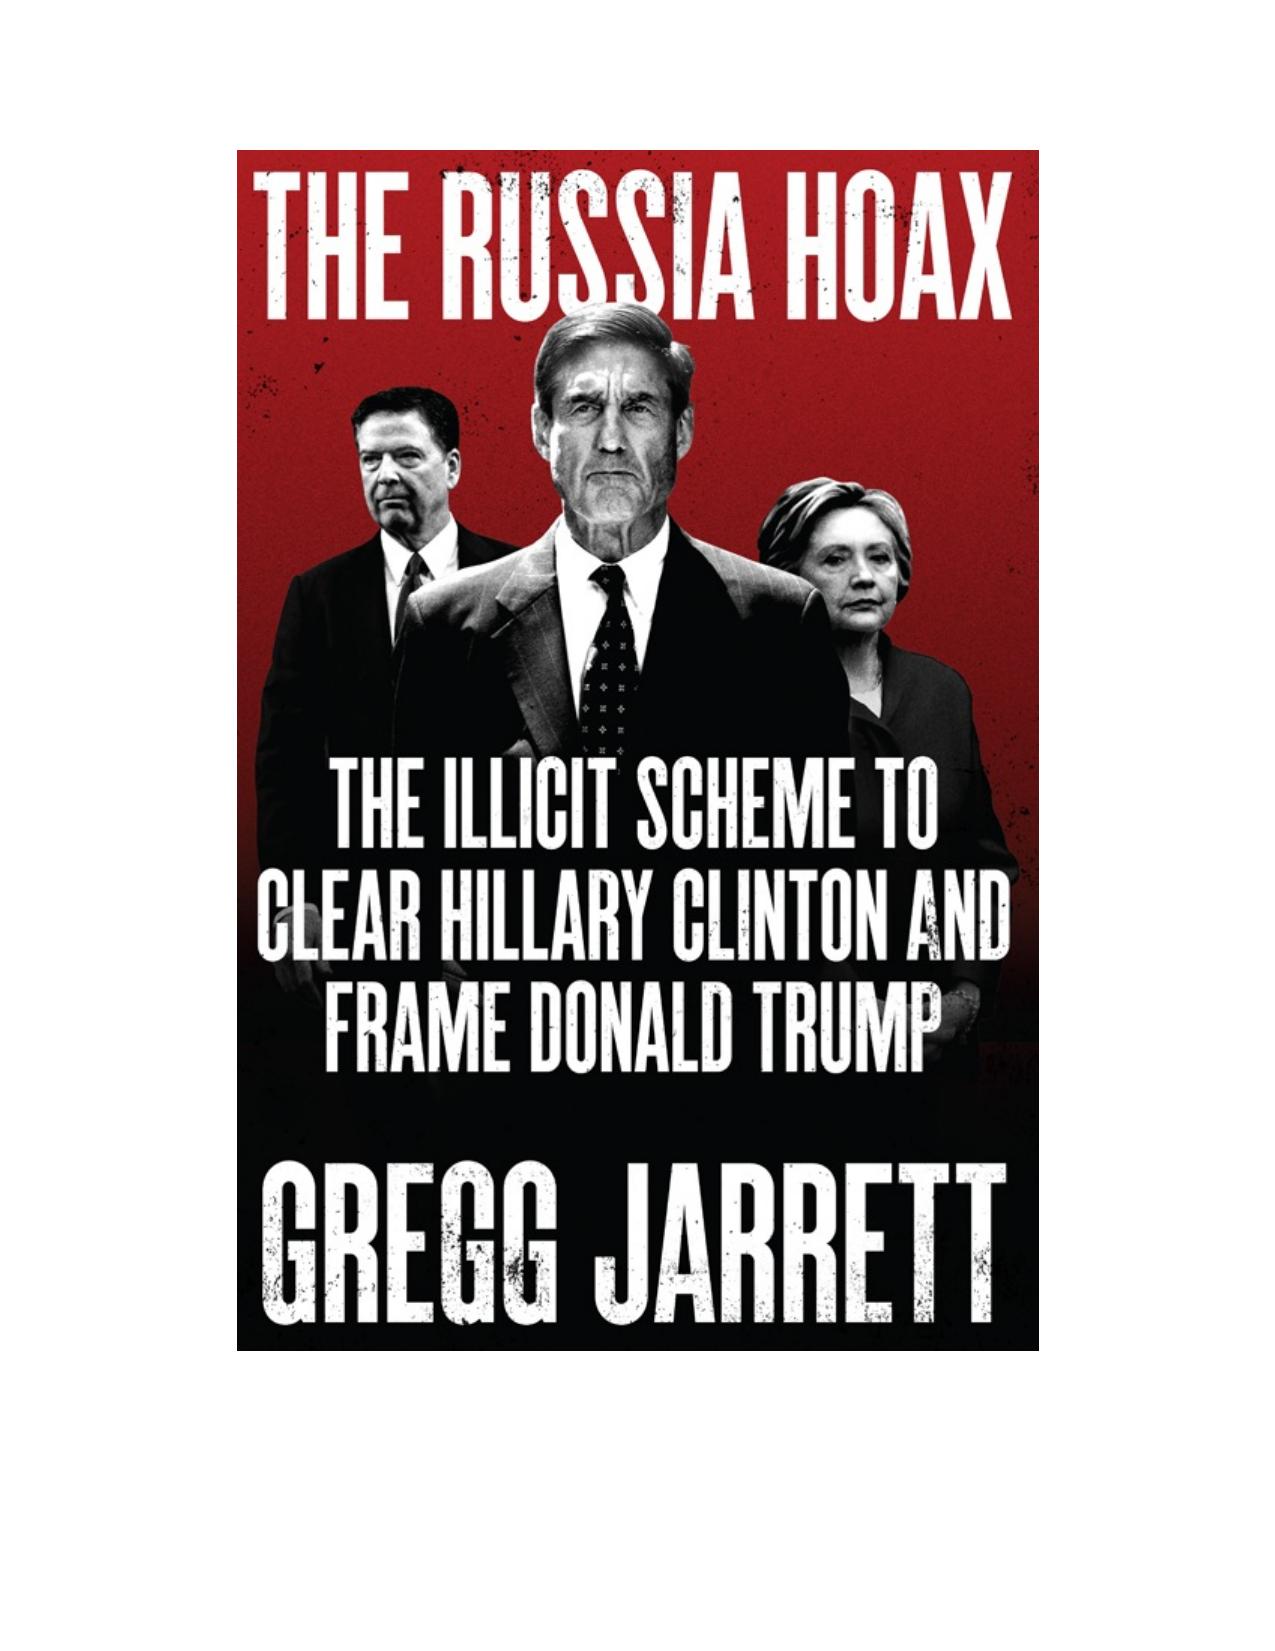 The Russia Hoax: The Illicit Scheme to Clear Hillary Clinton and Frame Donald Trump by Gregg Jarrett